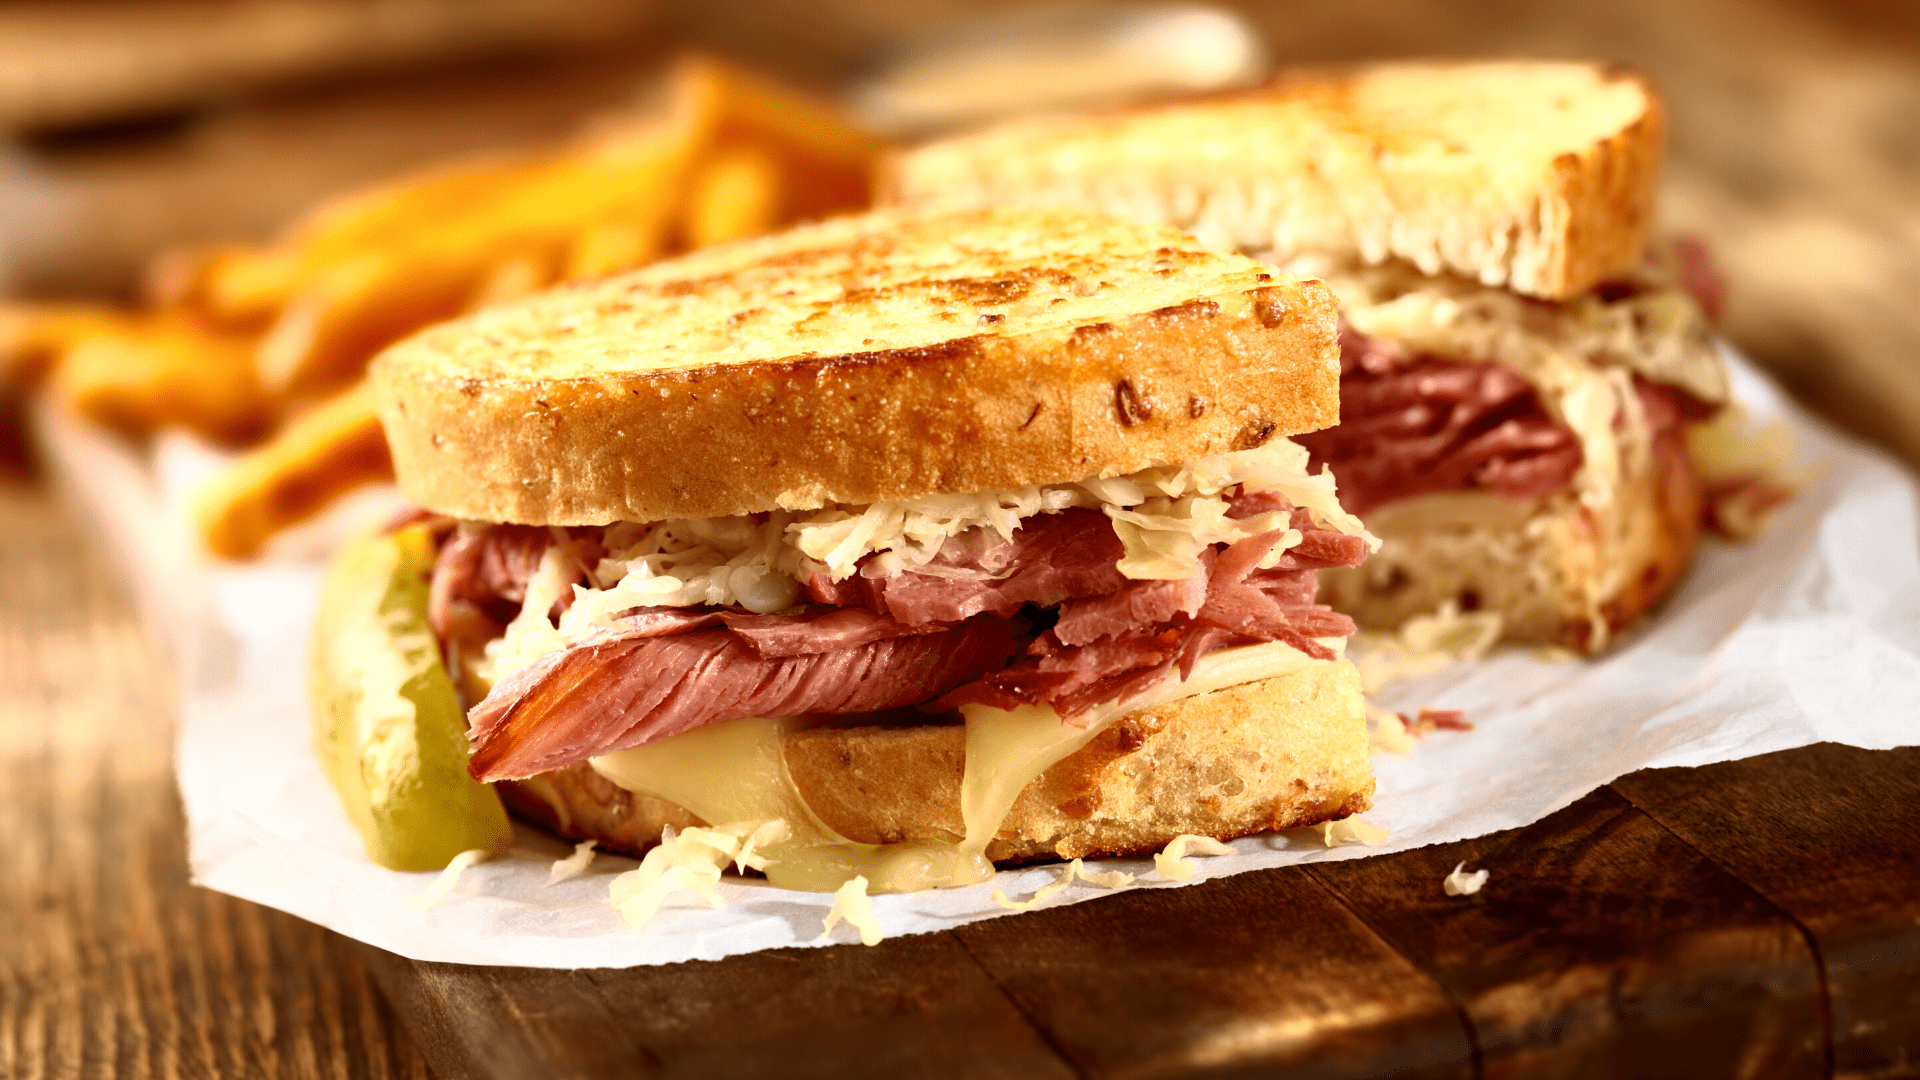 Smoked meat vs corned beef vs pastrami vs Montreal smoked meat | What’s what?